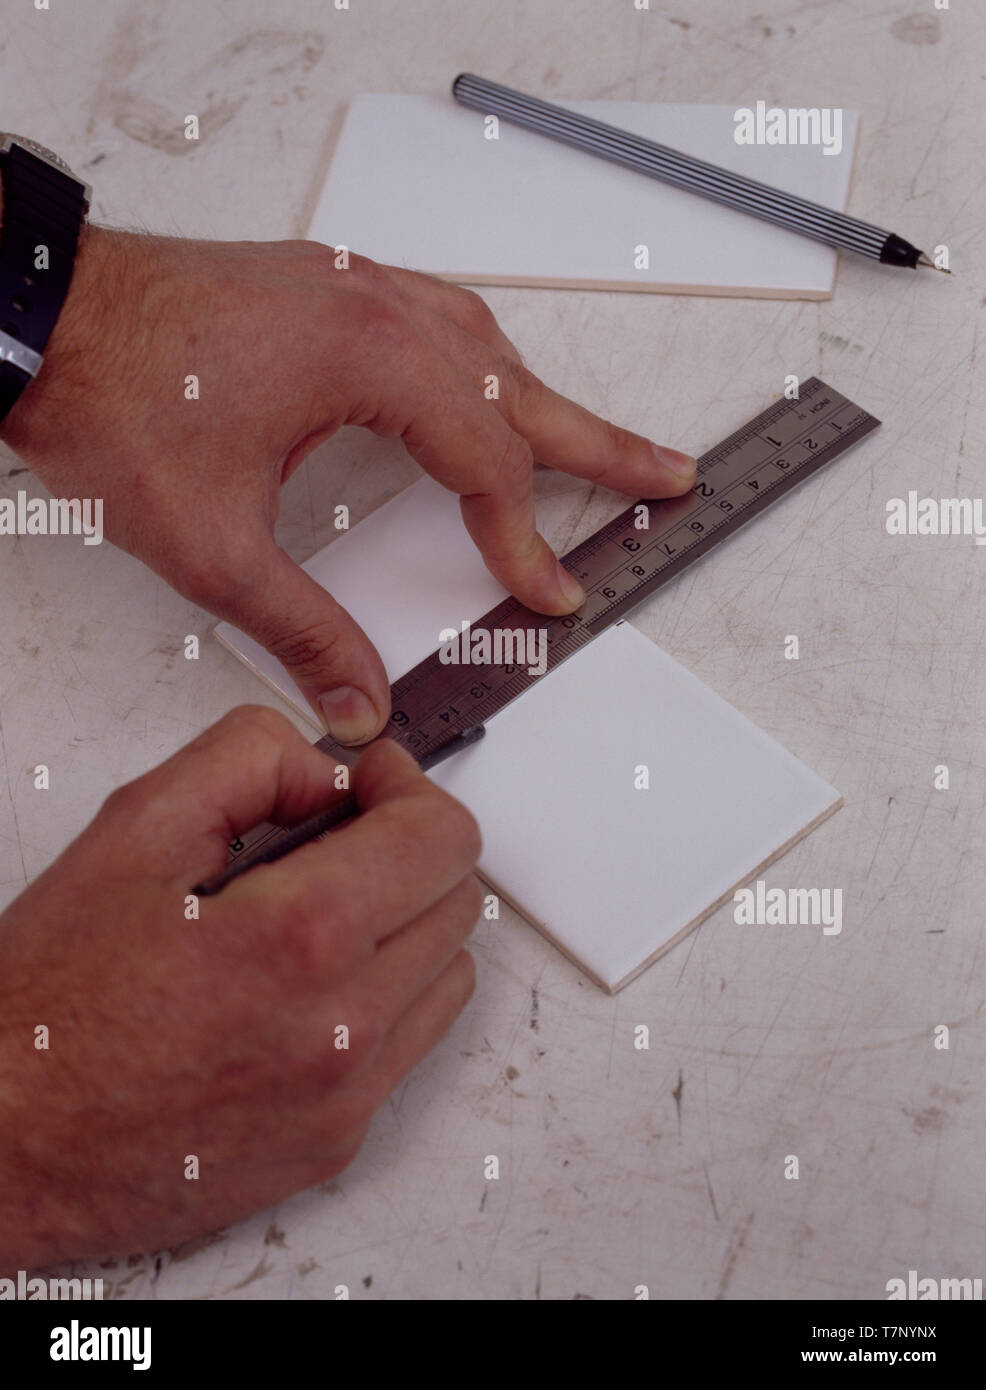 Hands measuring tiles with ruler Stock Photo